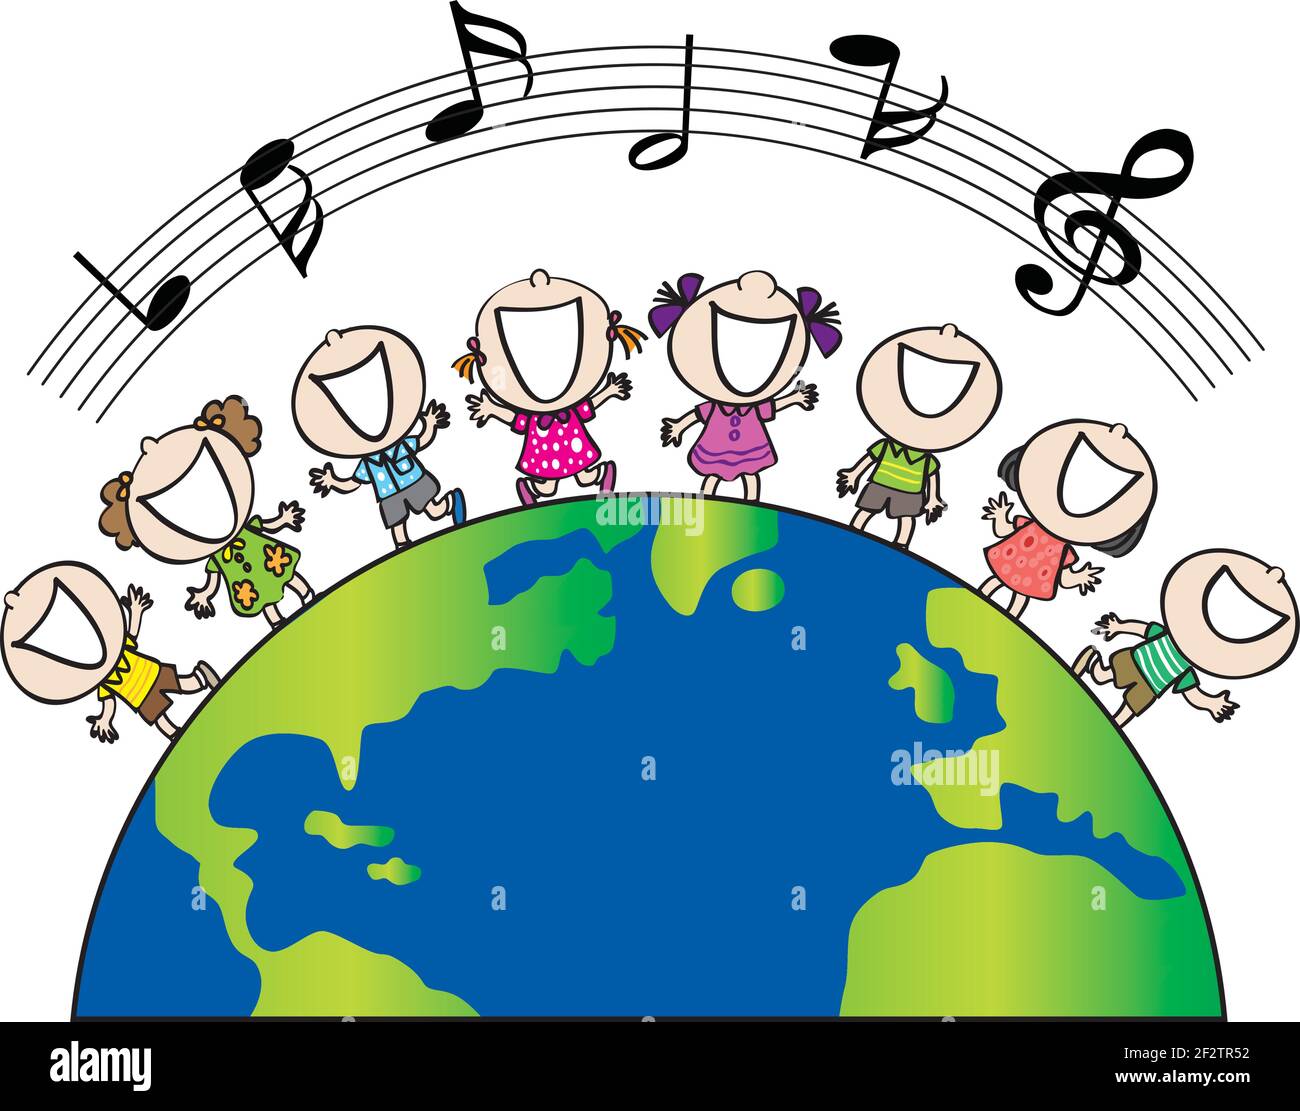 Song of earth Stock Vector Images - Alamy